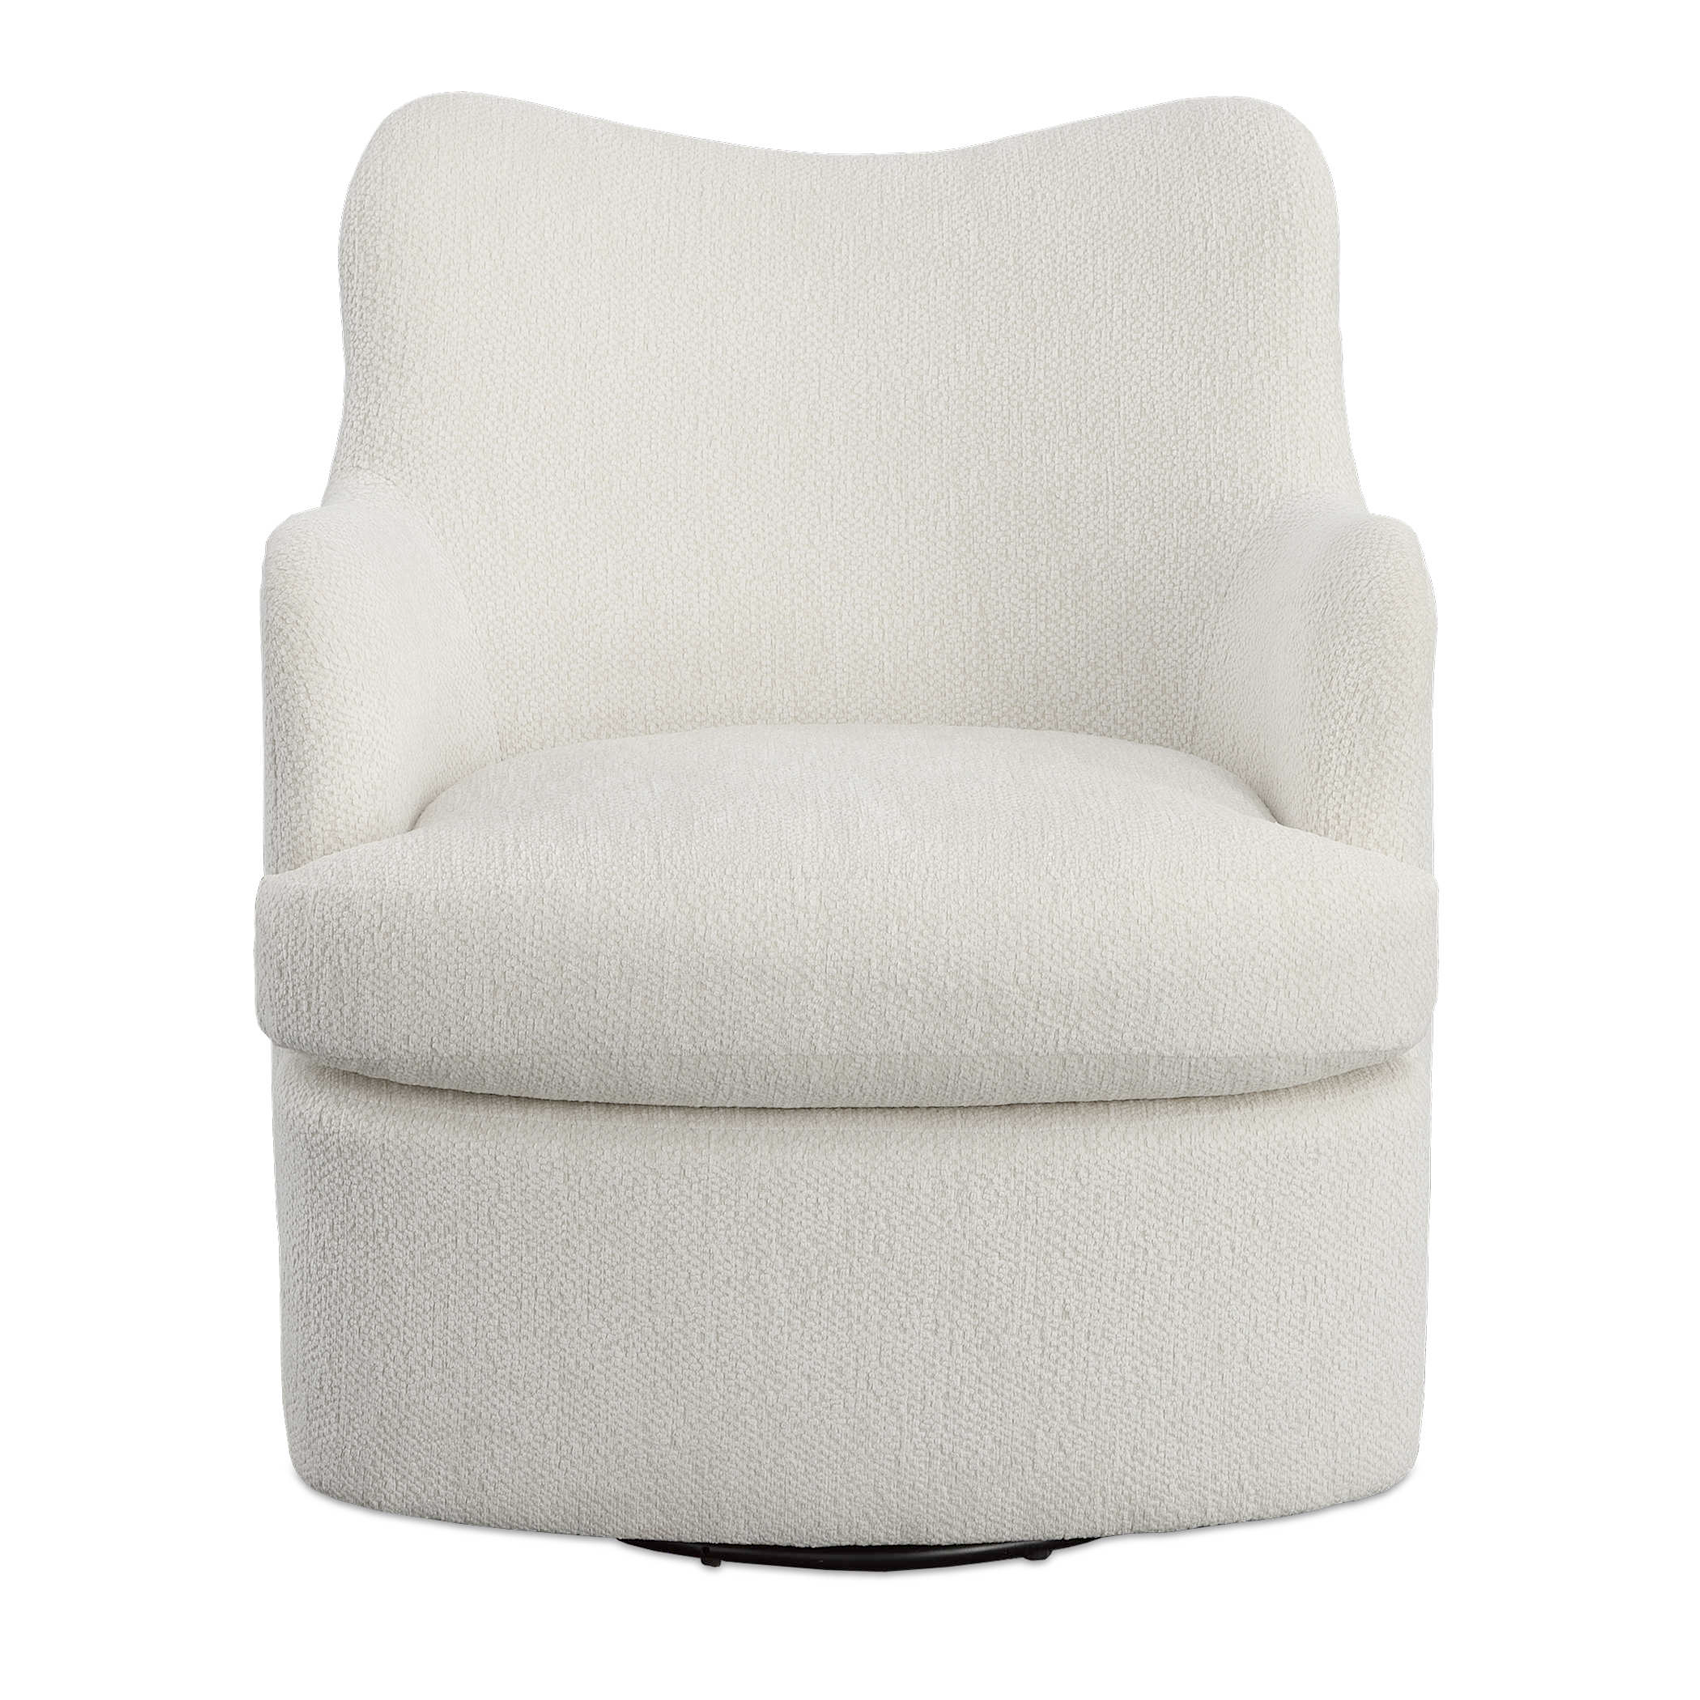 Chit-Chat Swivel Chair, Uttermost - RSVP Style